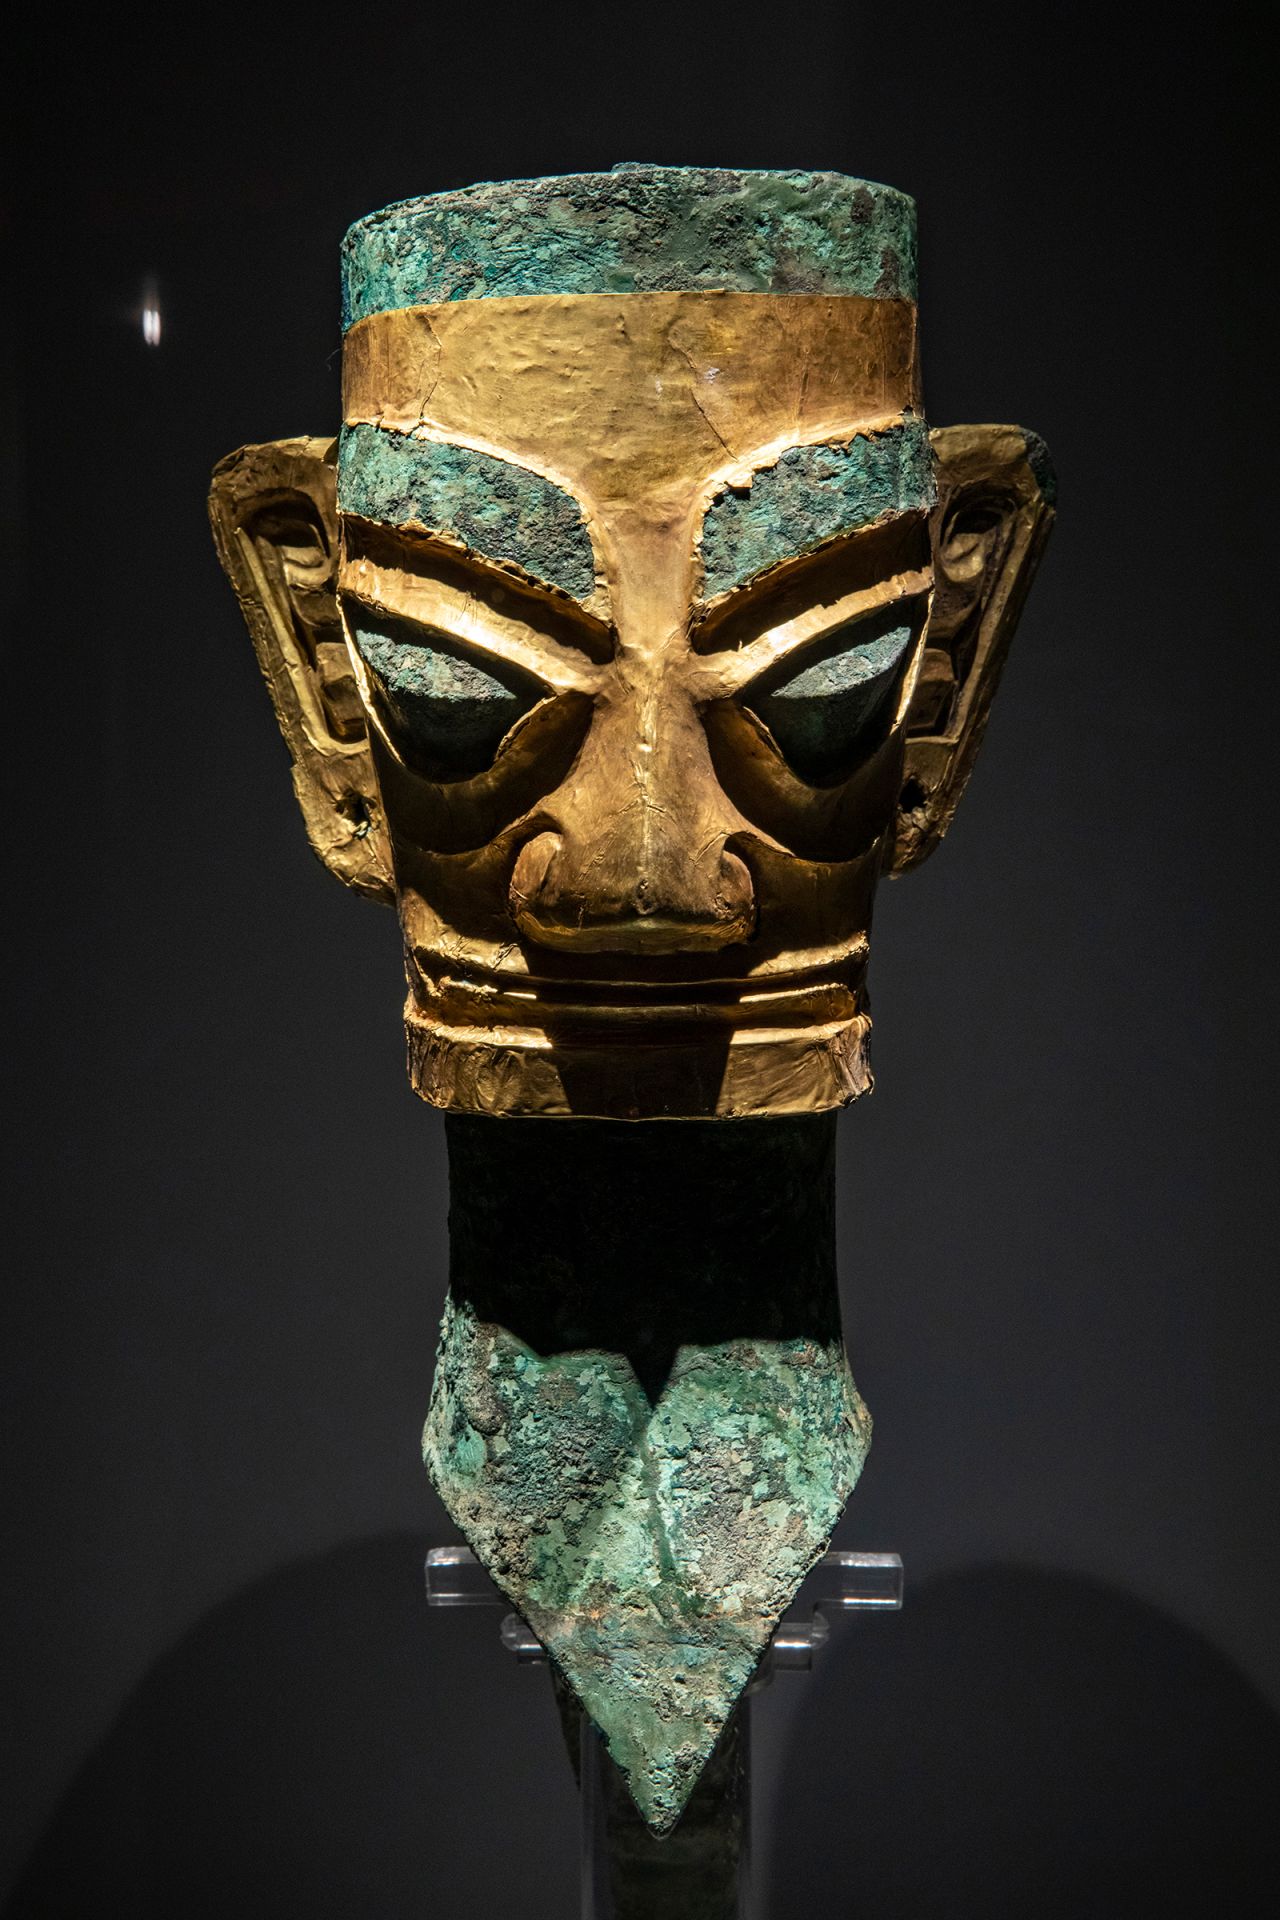 A bronze head and mask uncovered from Sanxingdui in 1986, when the first sacrificial pits were found at the site.